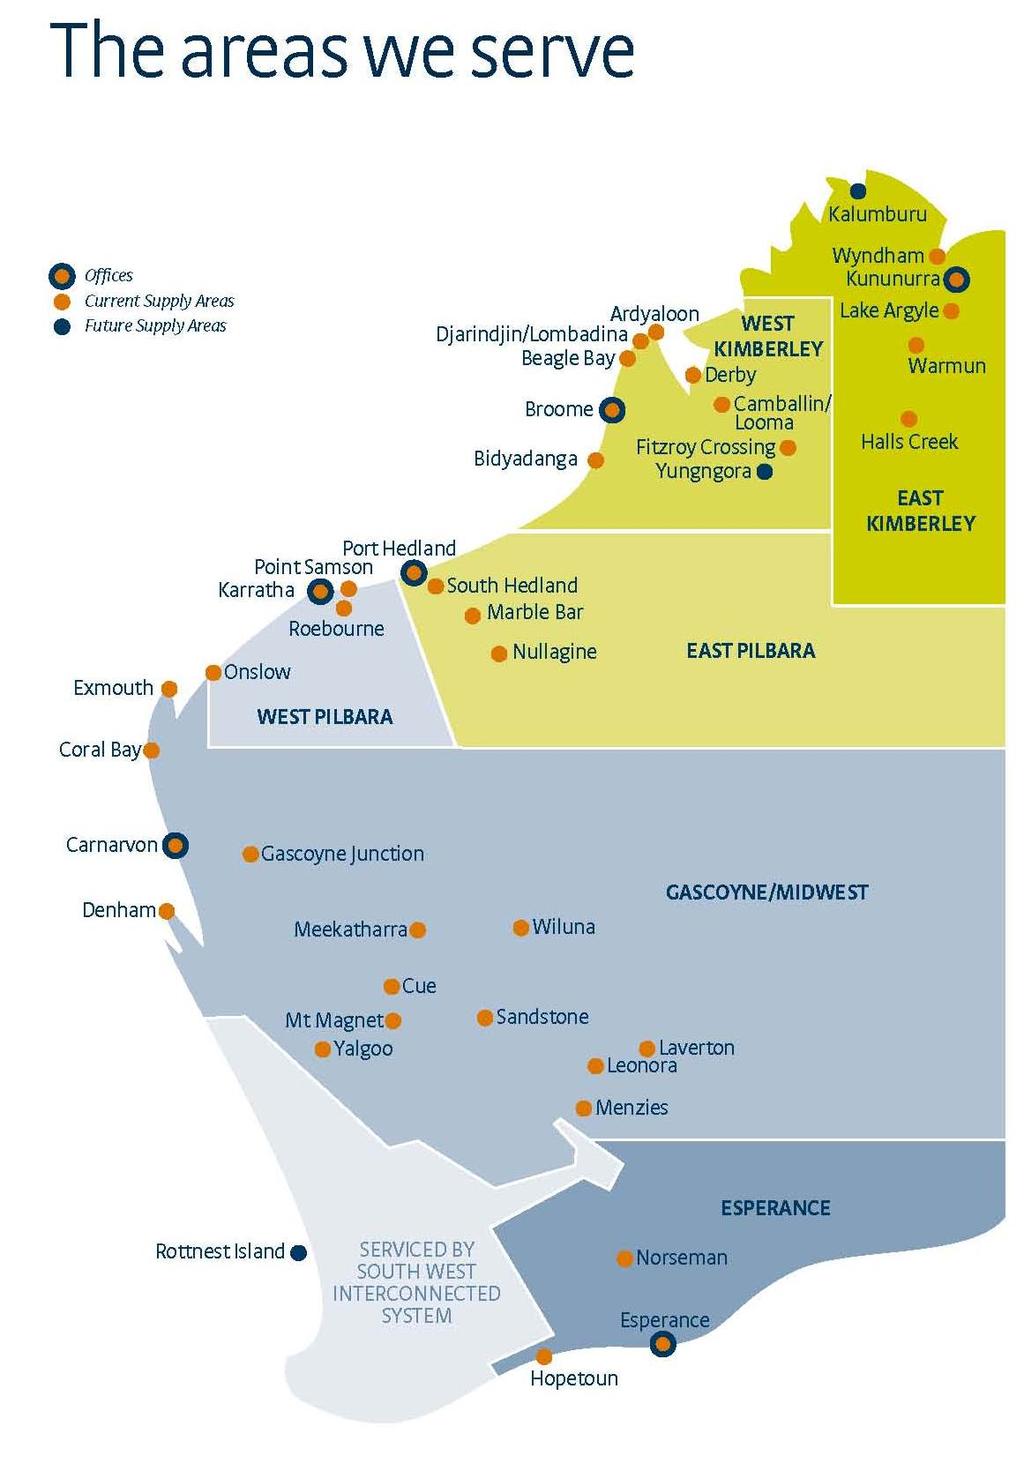 HORIZON POWER SERVICE AREA MAP Horizon Power is the Network Operator for thirty